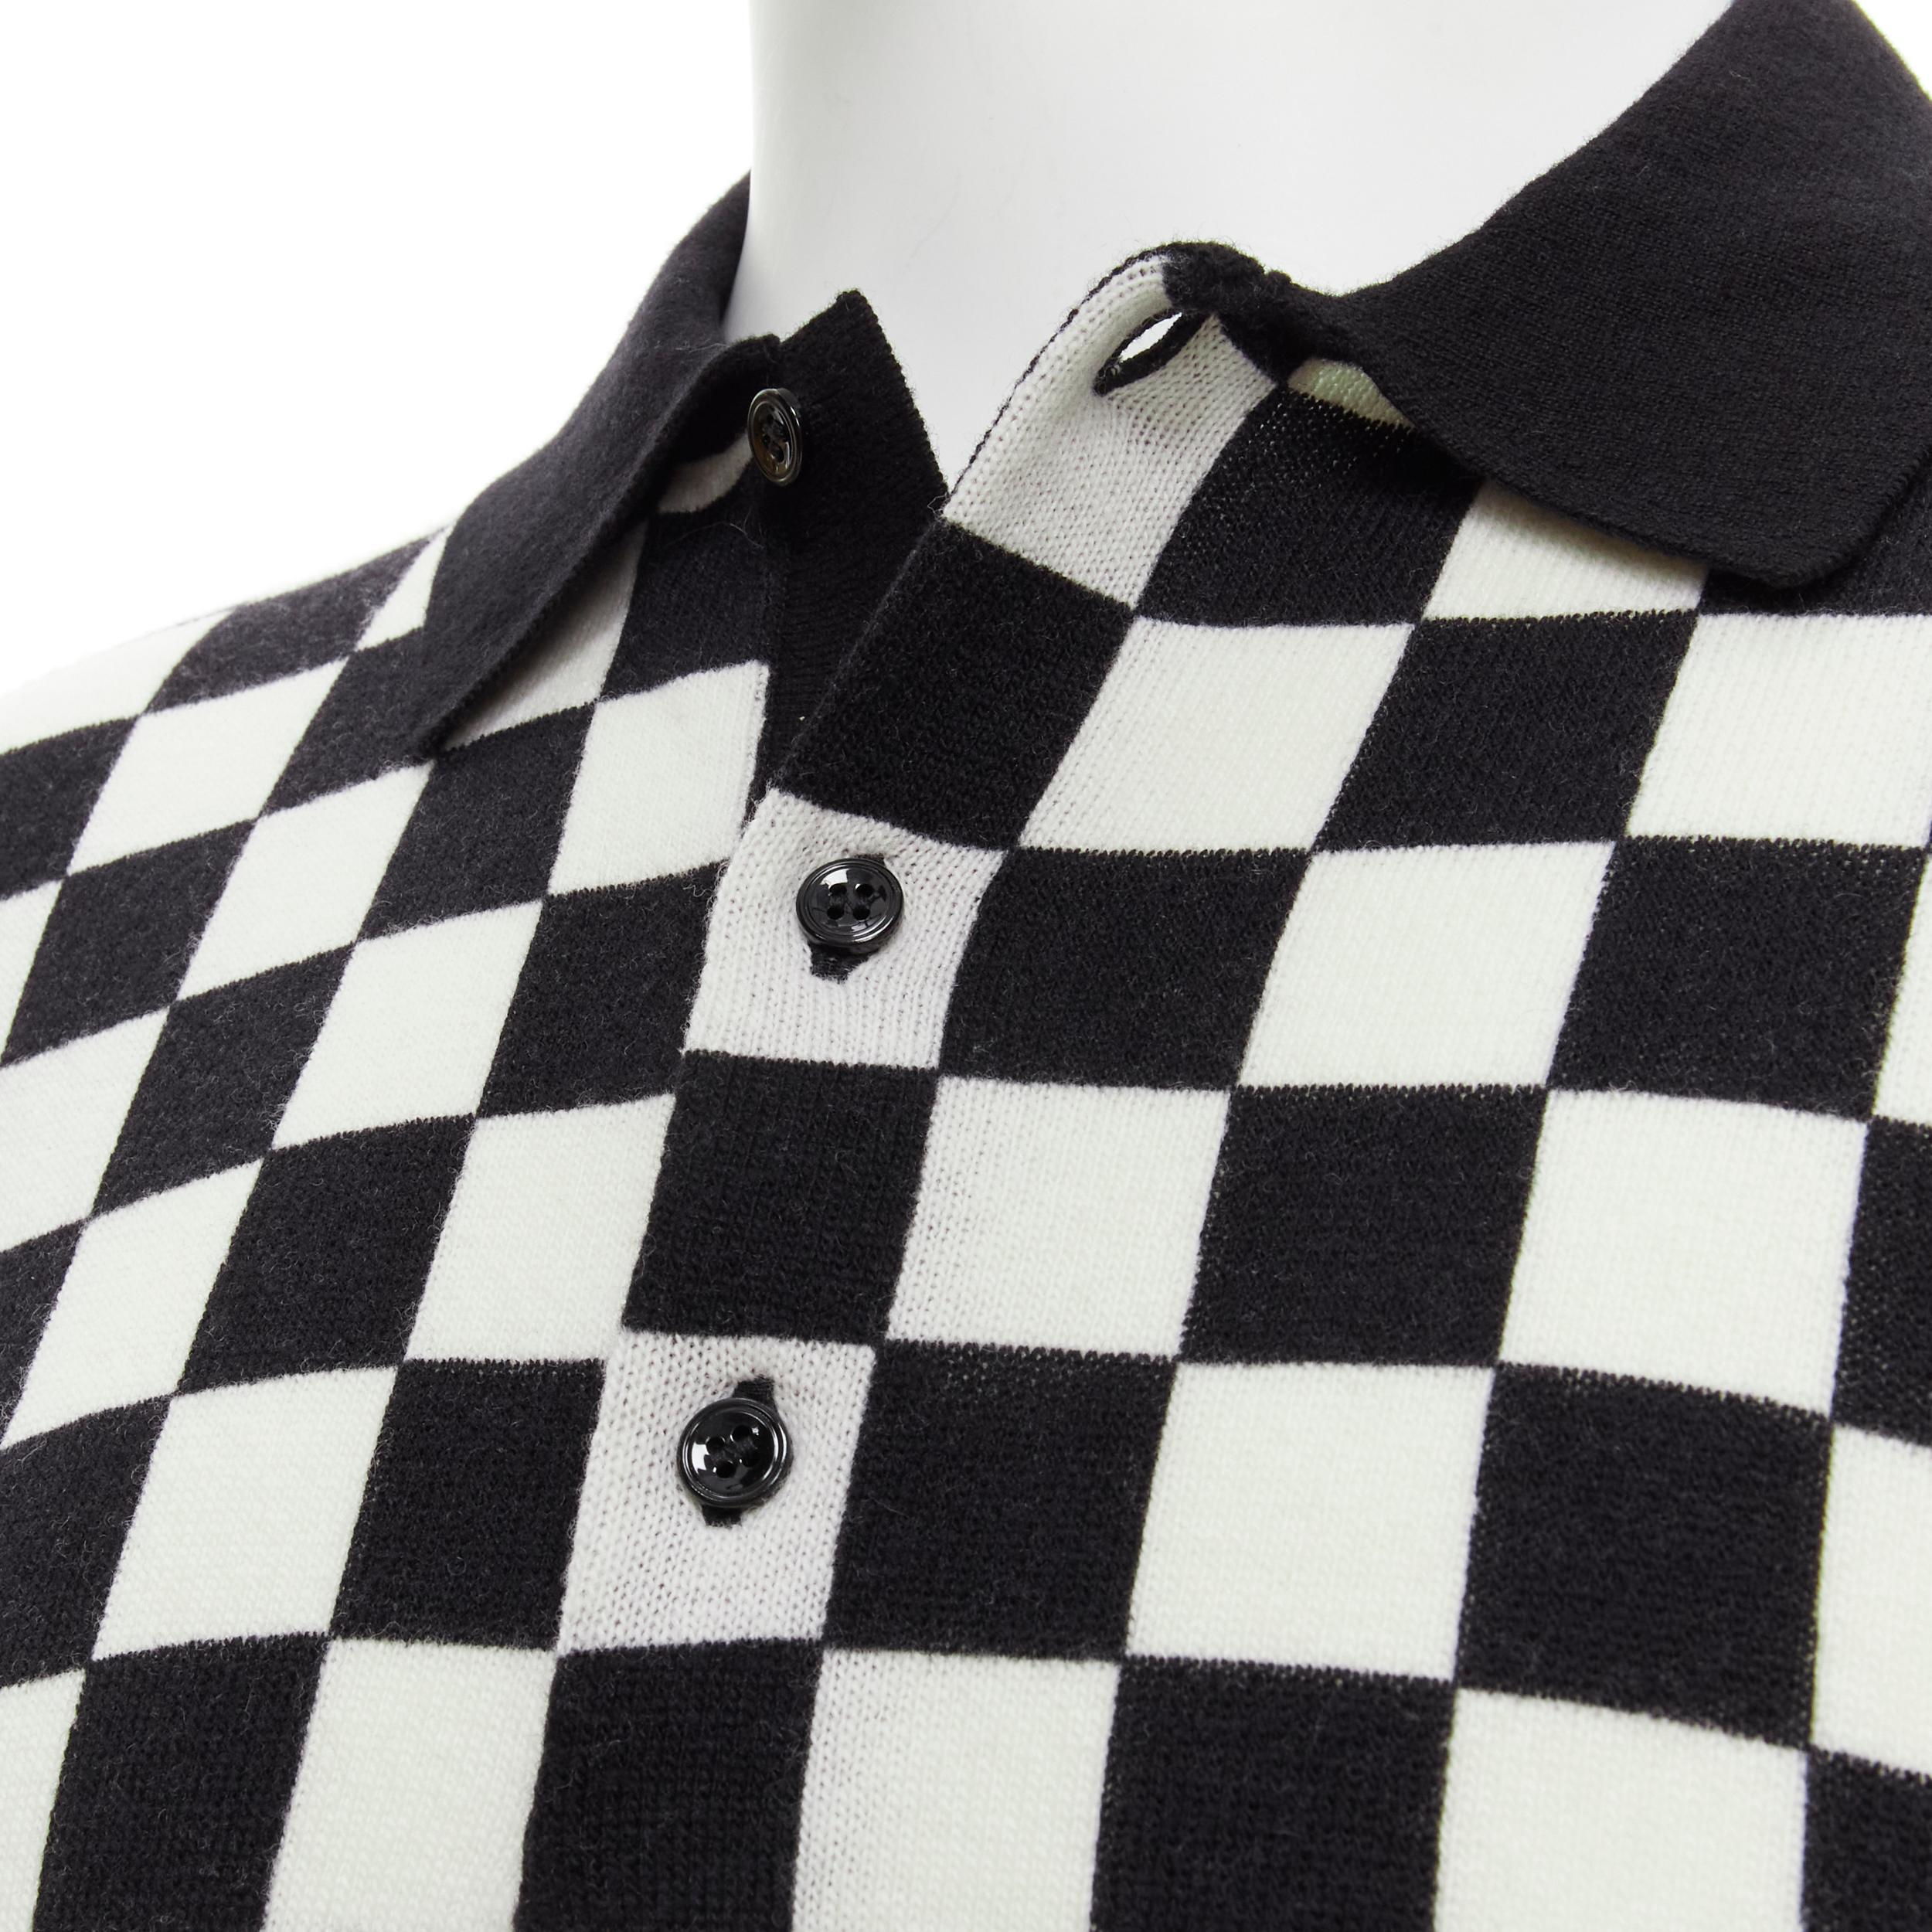 new CELINE Hedi Slimane 2019 Runway black white Damier checkered polo sweater M 
Reference: TGAS/B02004 
Brand: Celine 
Designer: Hedi Slimane 
Collection: Spring Summer 2019 Runway 
Material: Wool 
Color: Black 
Pattern: Checked 
Extra Detail: From